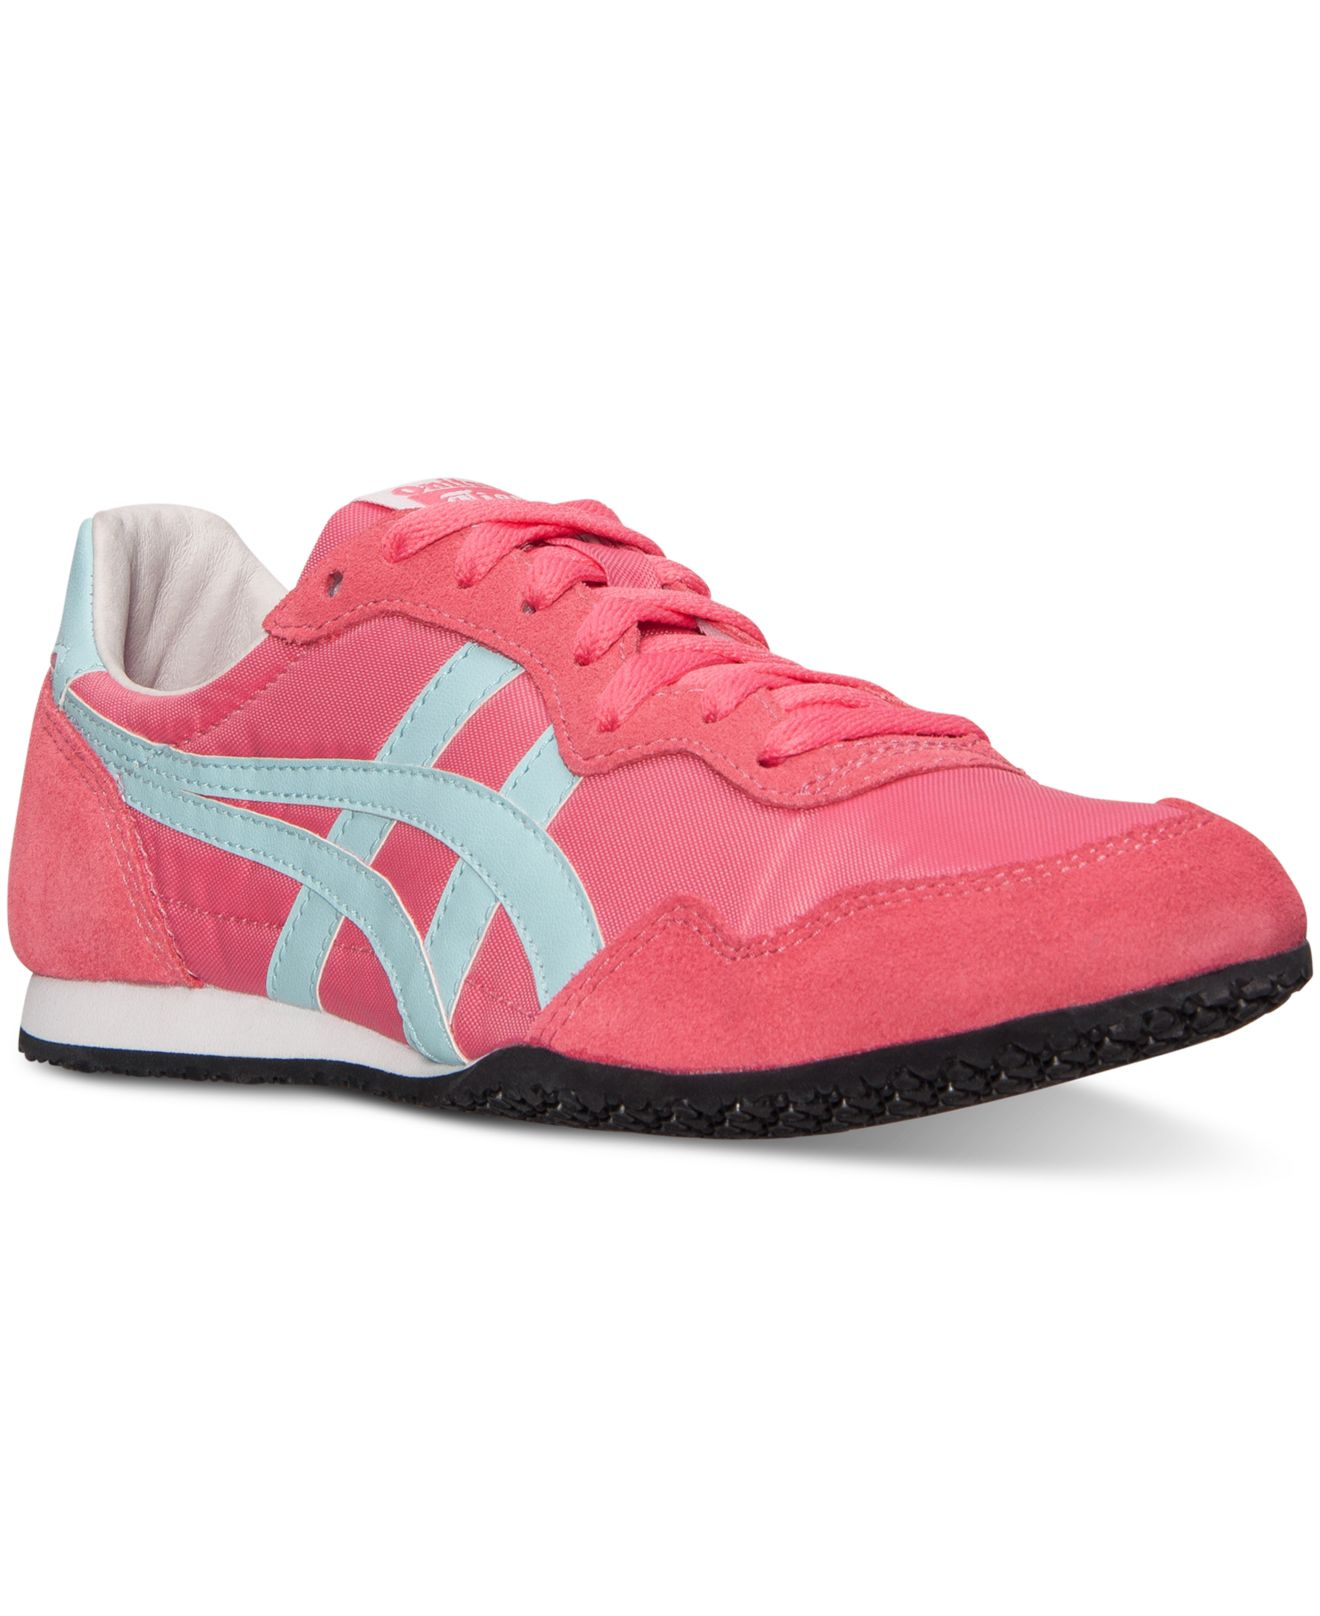 Asics Women's Onitsuka Tiger Serrano Casual Sneakers From Finish Line ...